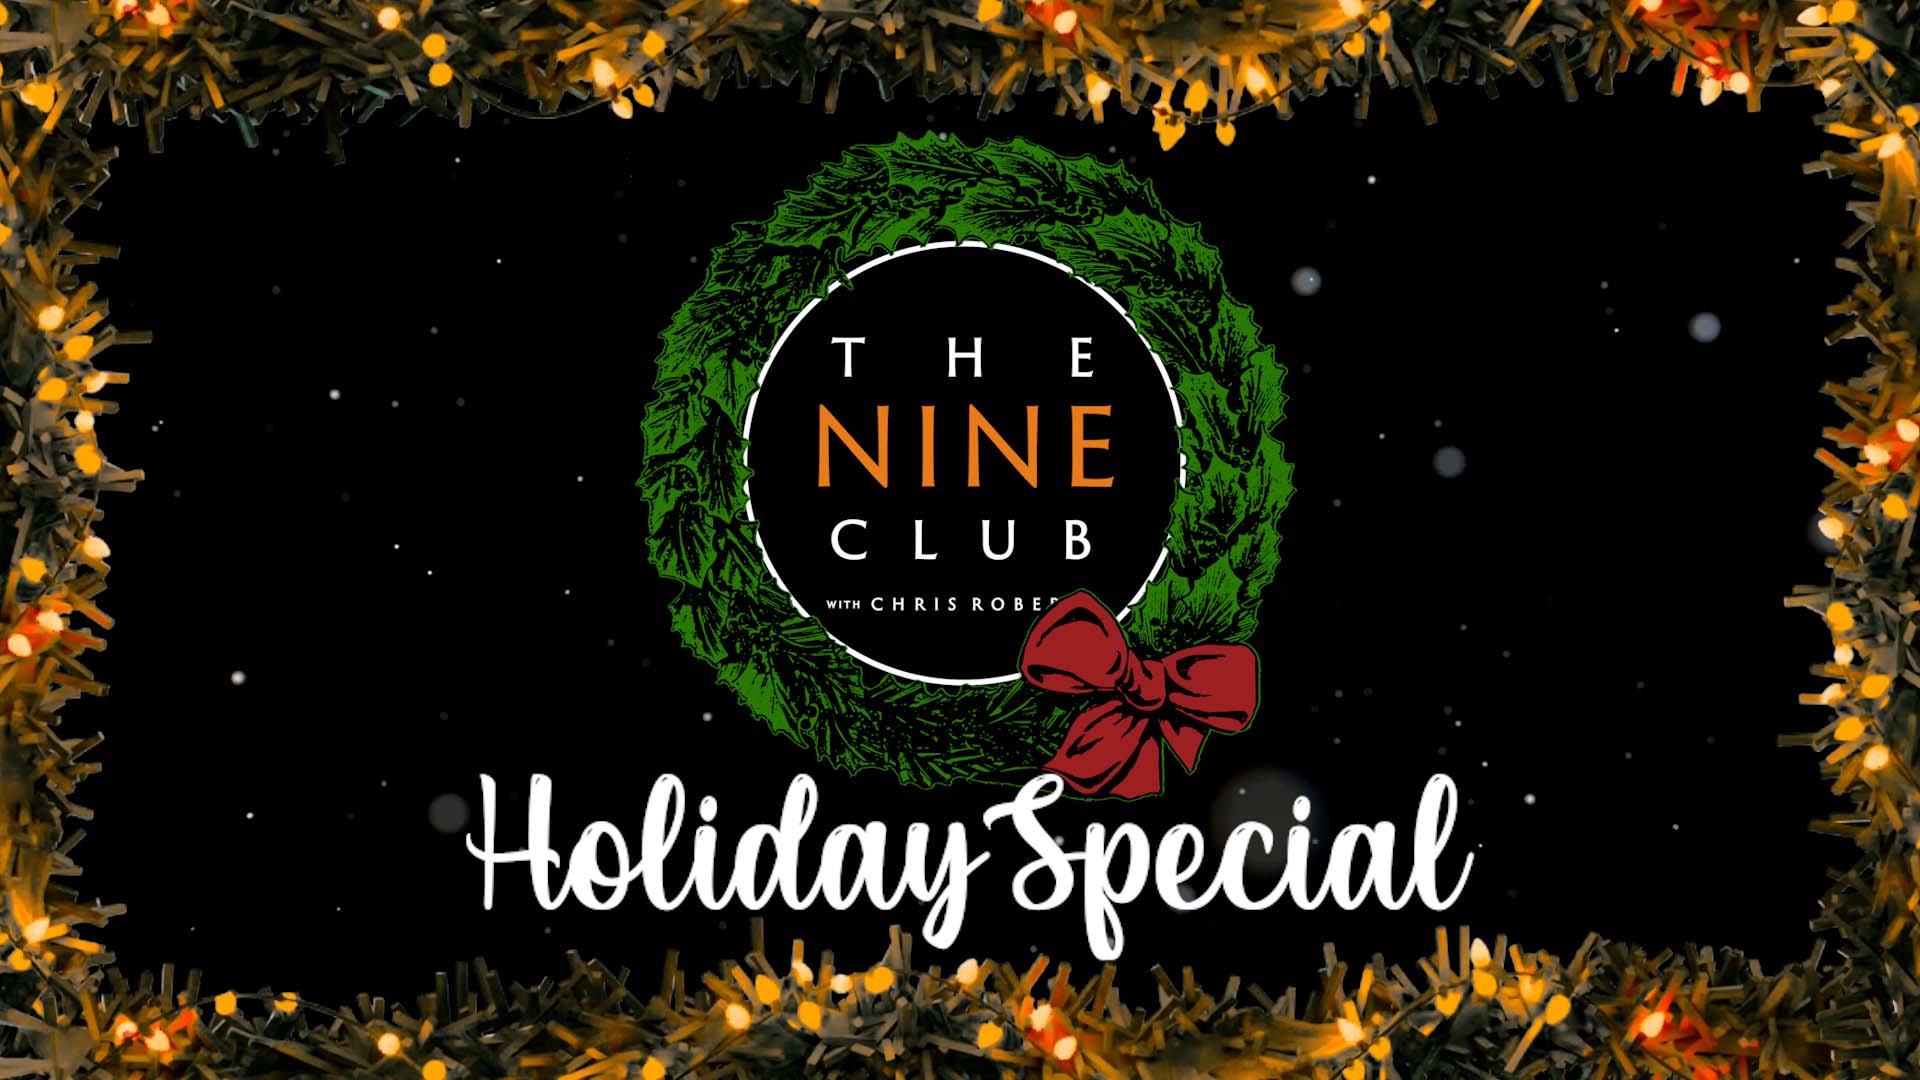 The Nine Club Holiday Special